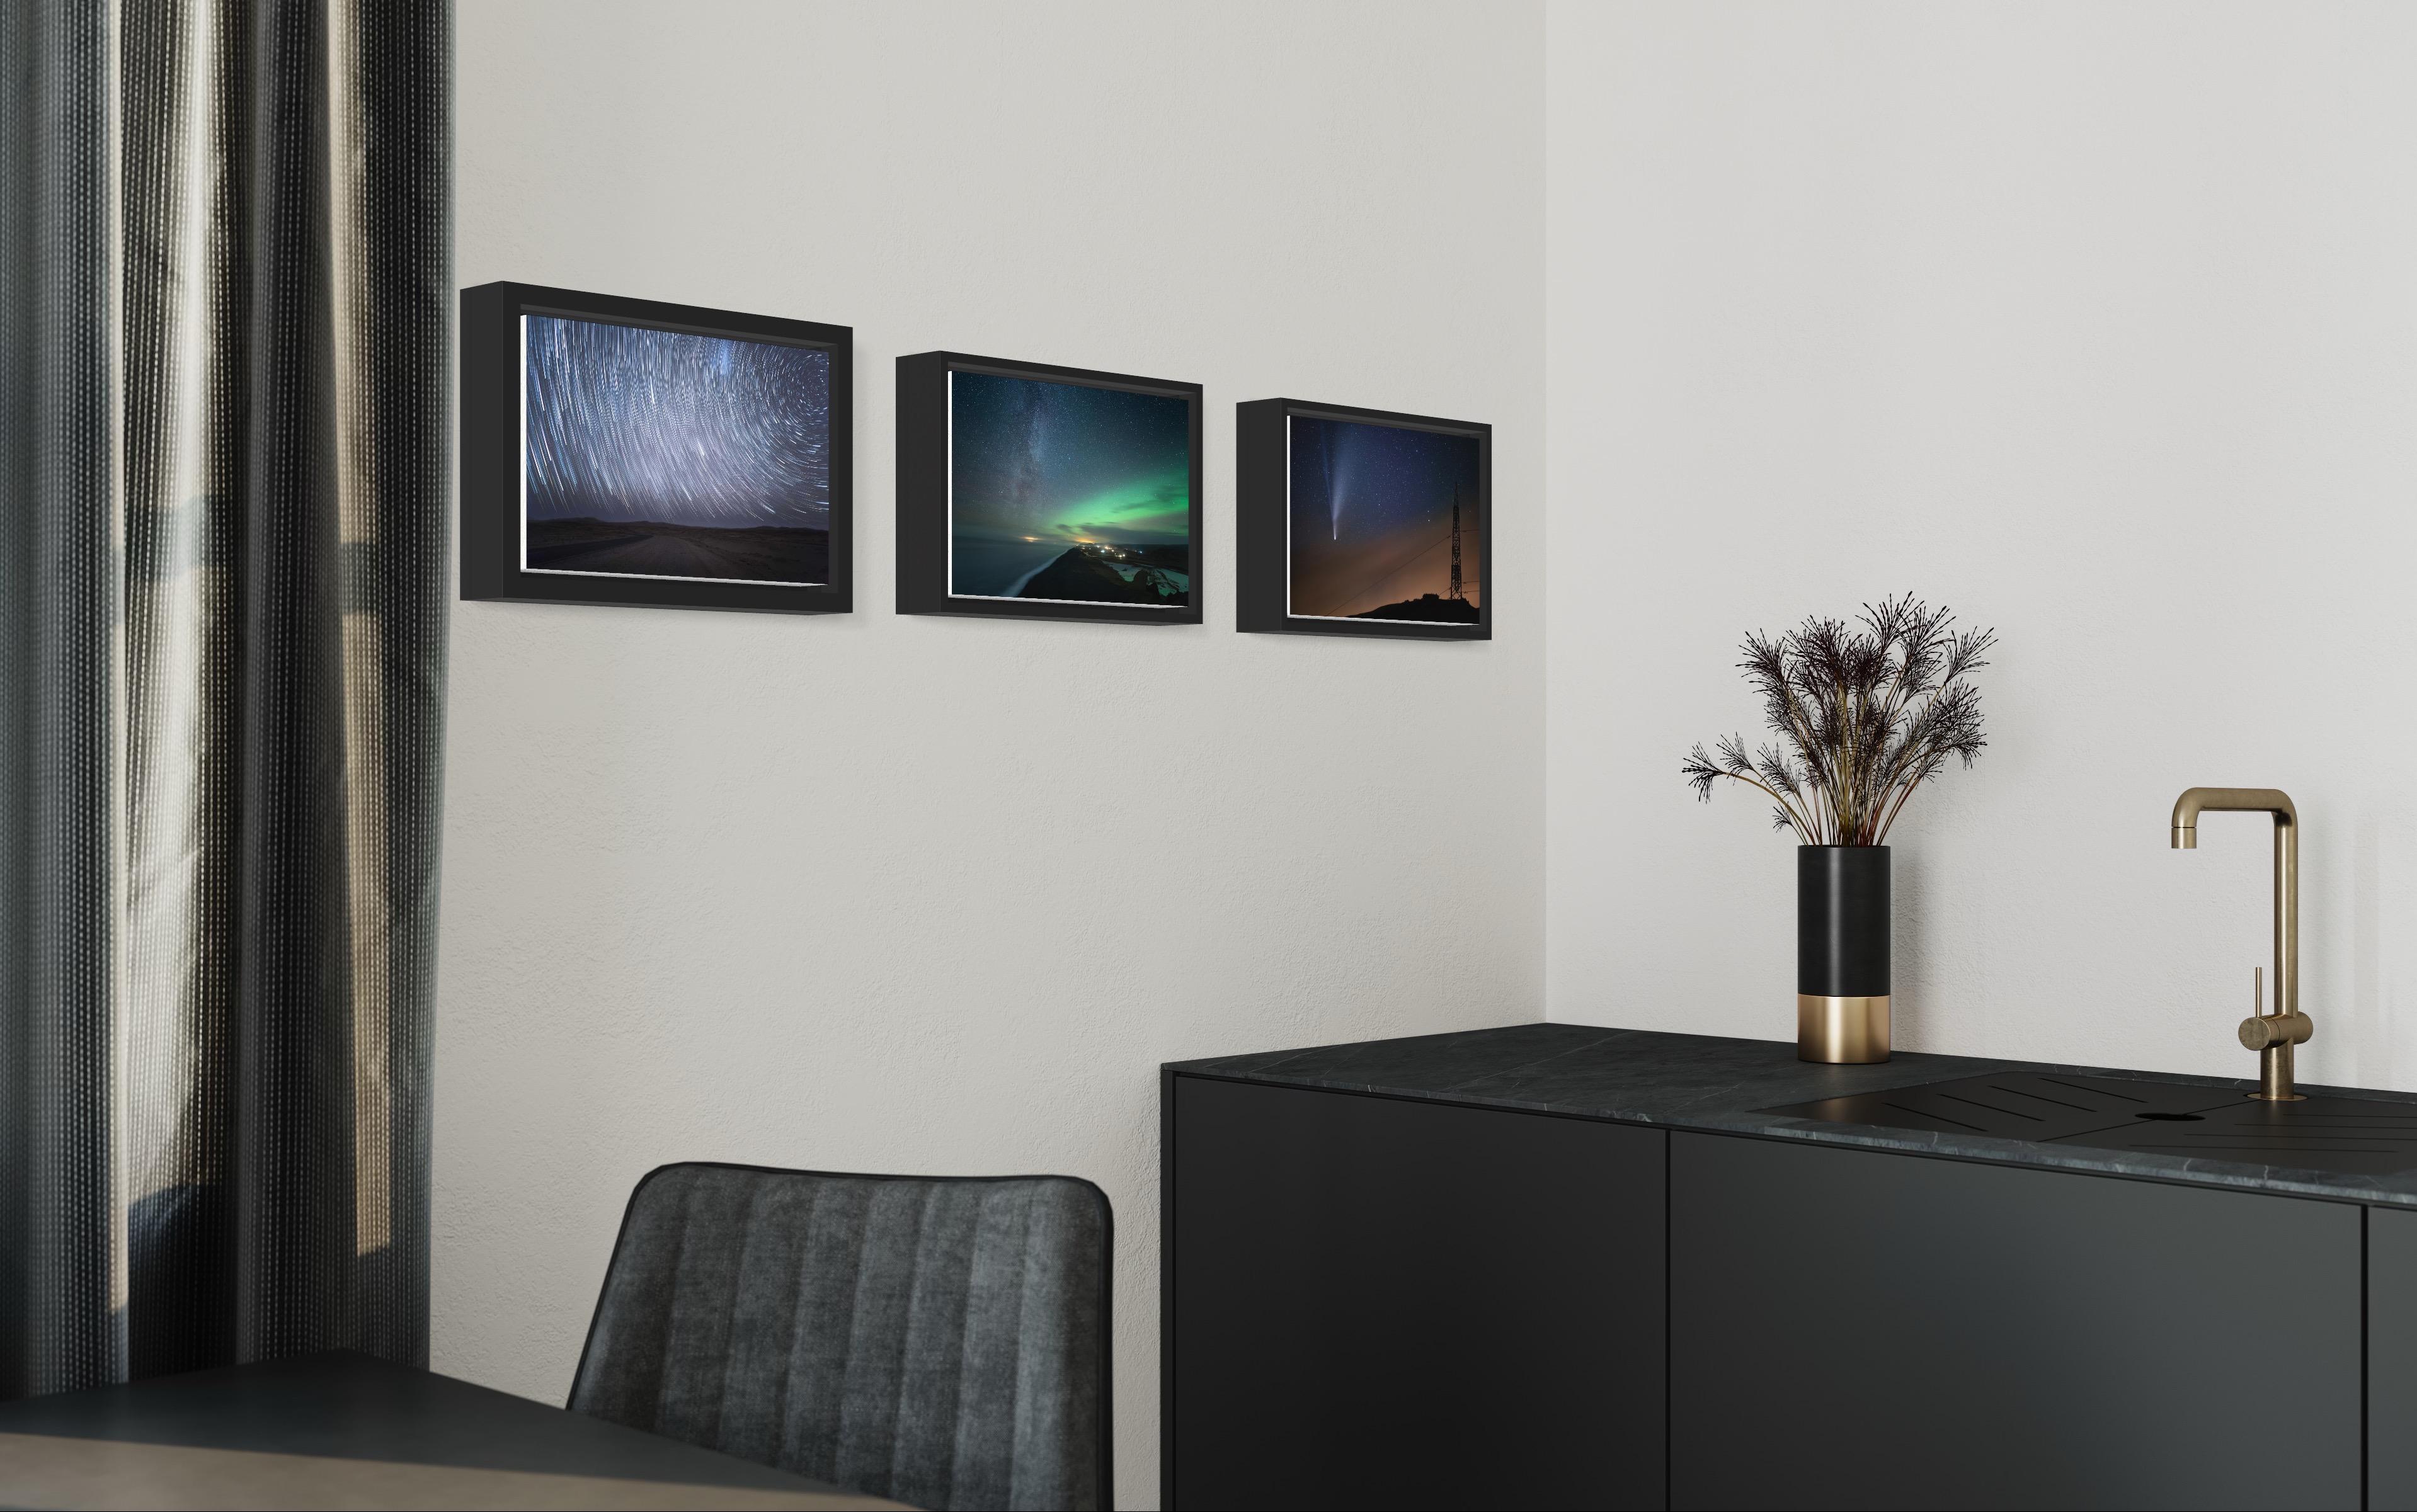 Comet approaches the Earth. Color night photo in a black wooden frame with glass - Contemporary Photograph by Anna Dobrovolskaya-Mints